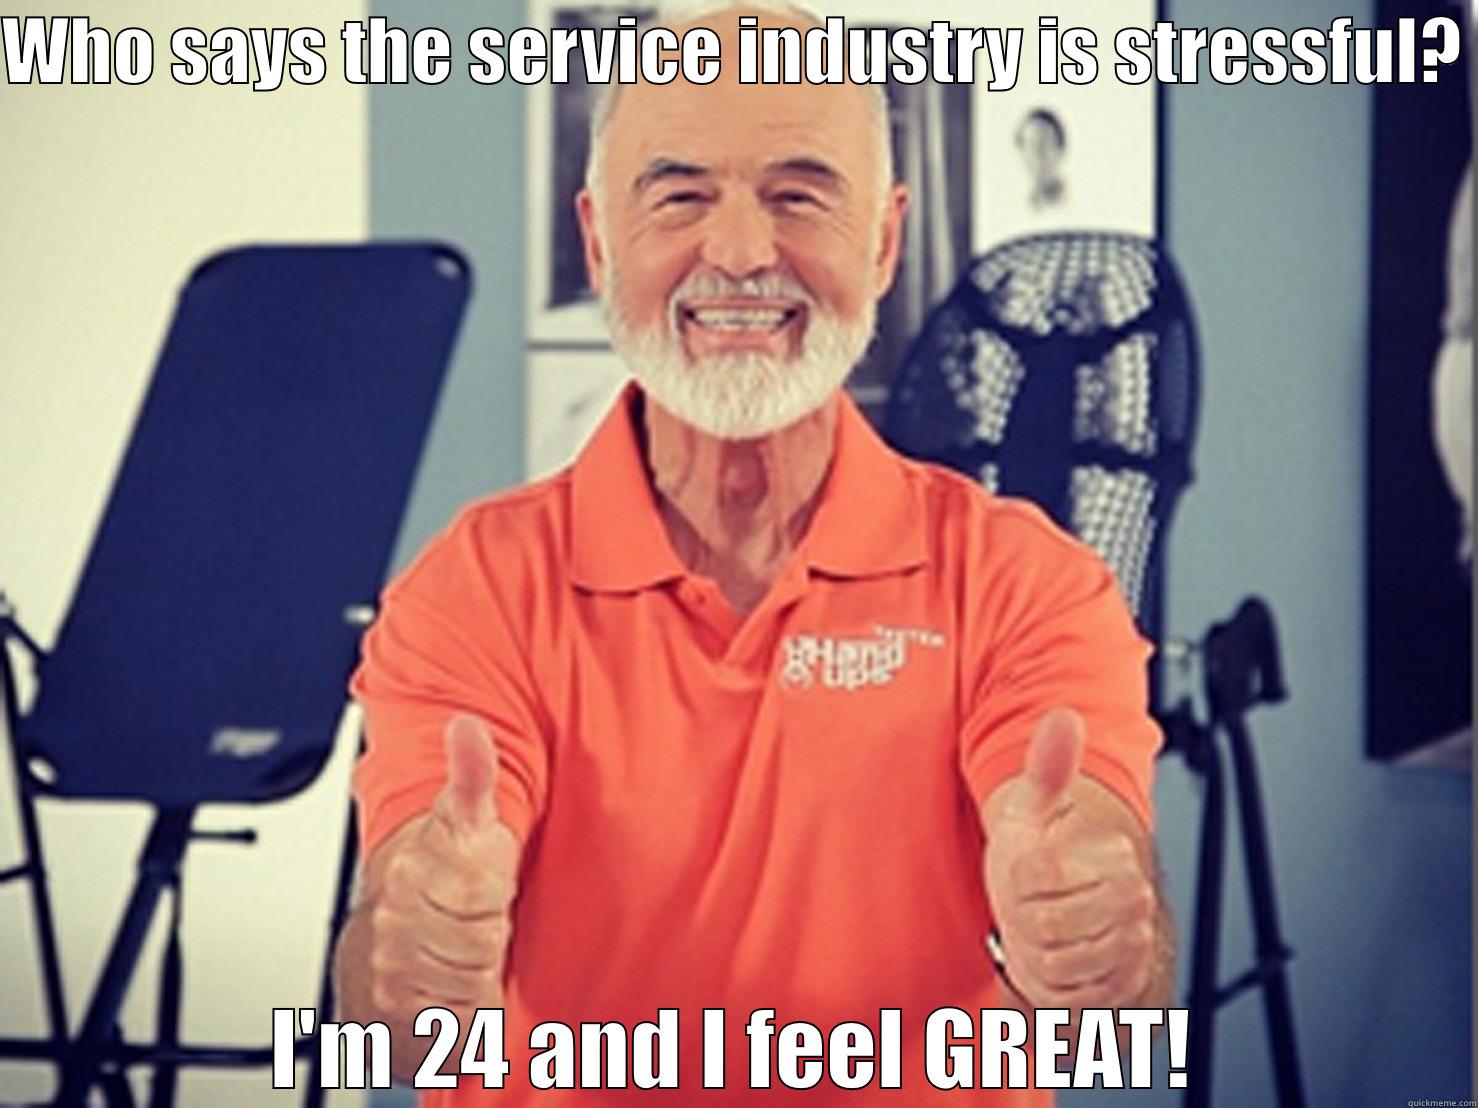 WHO SAYS THE SERVICE INDUSTRY IS STRESSFUL?  I'M 24 AND I FEEL GREAT! Misc